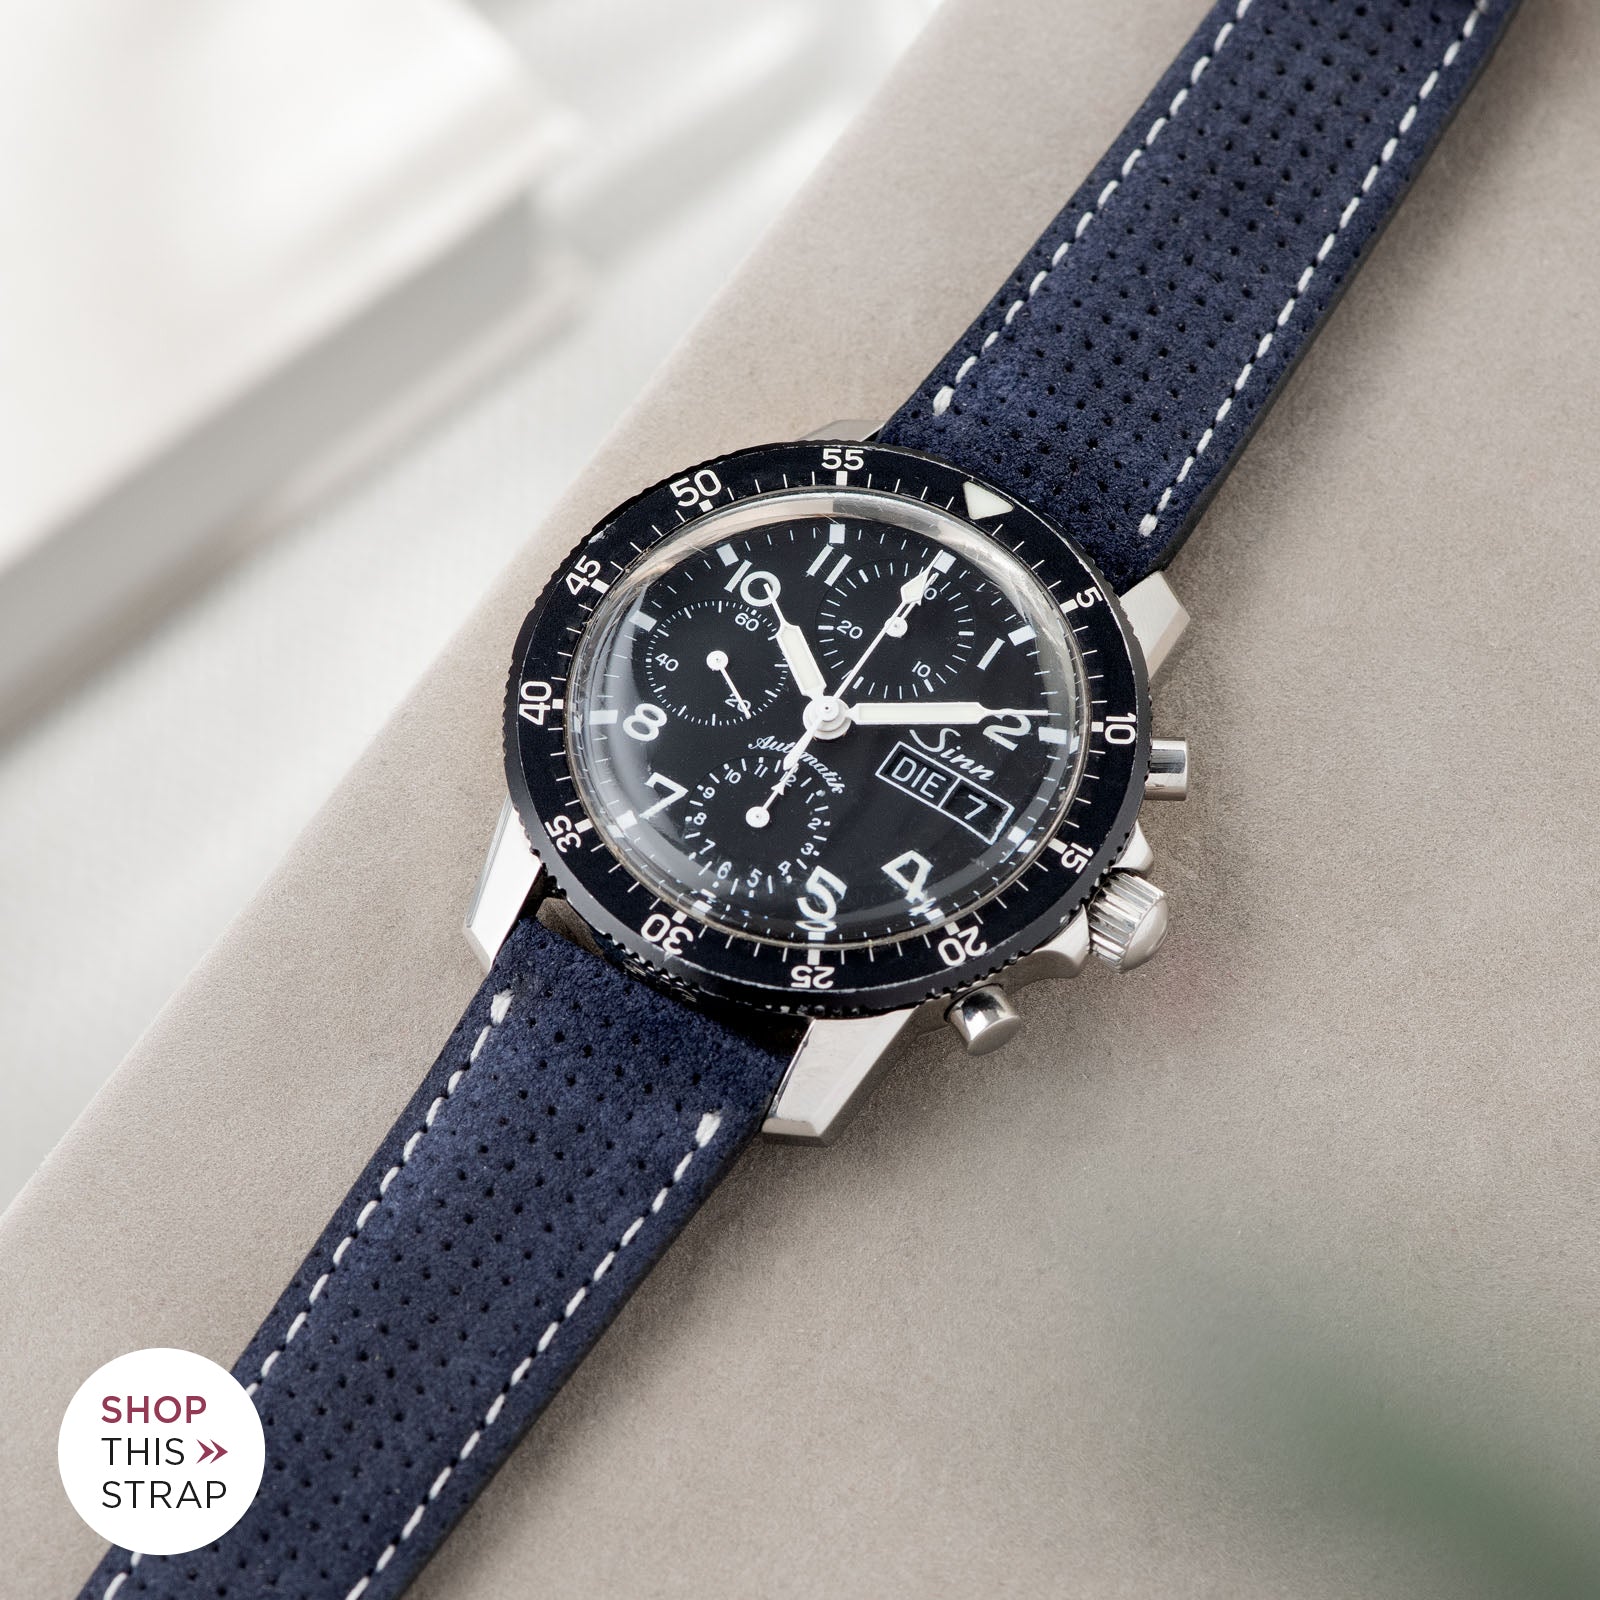 Bulang and Sons_Strap Guide_Sinn 103St Flieder Chronograph_Punched Blue Silky Suede Leather Watch Strap